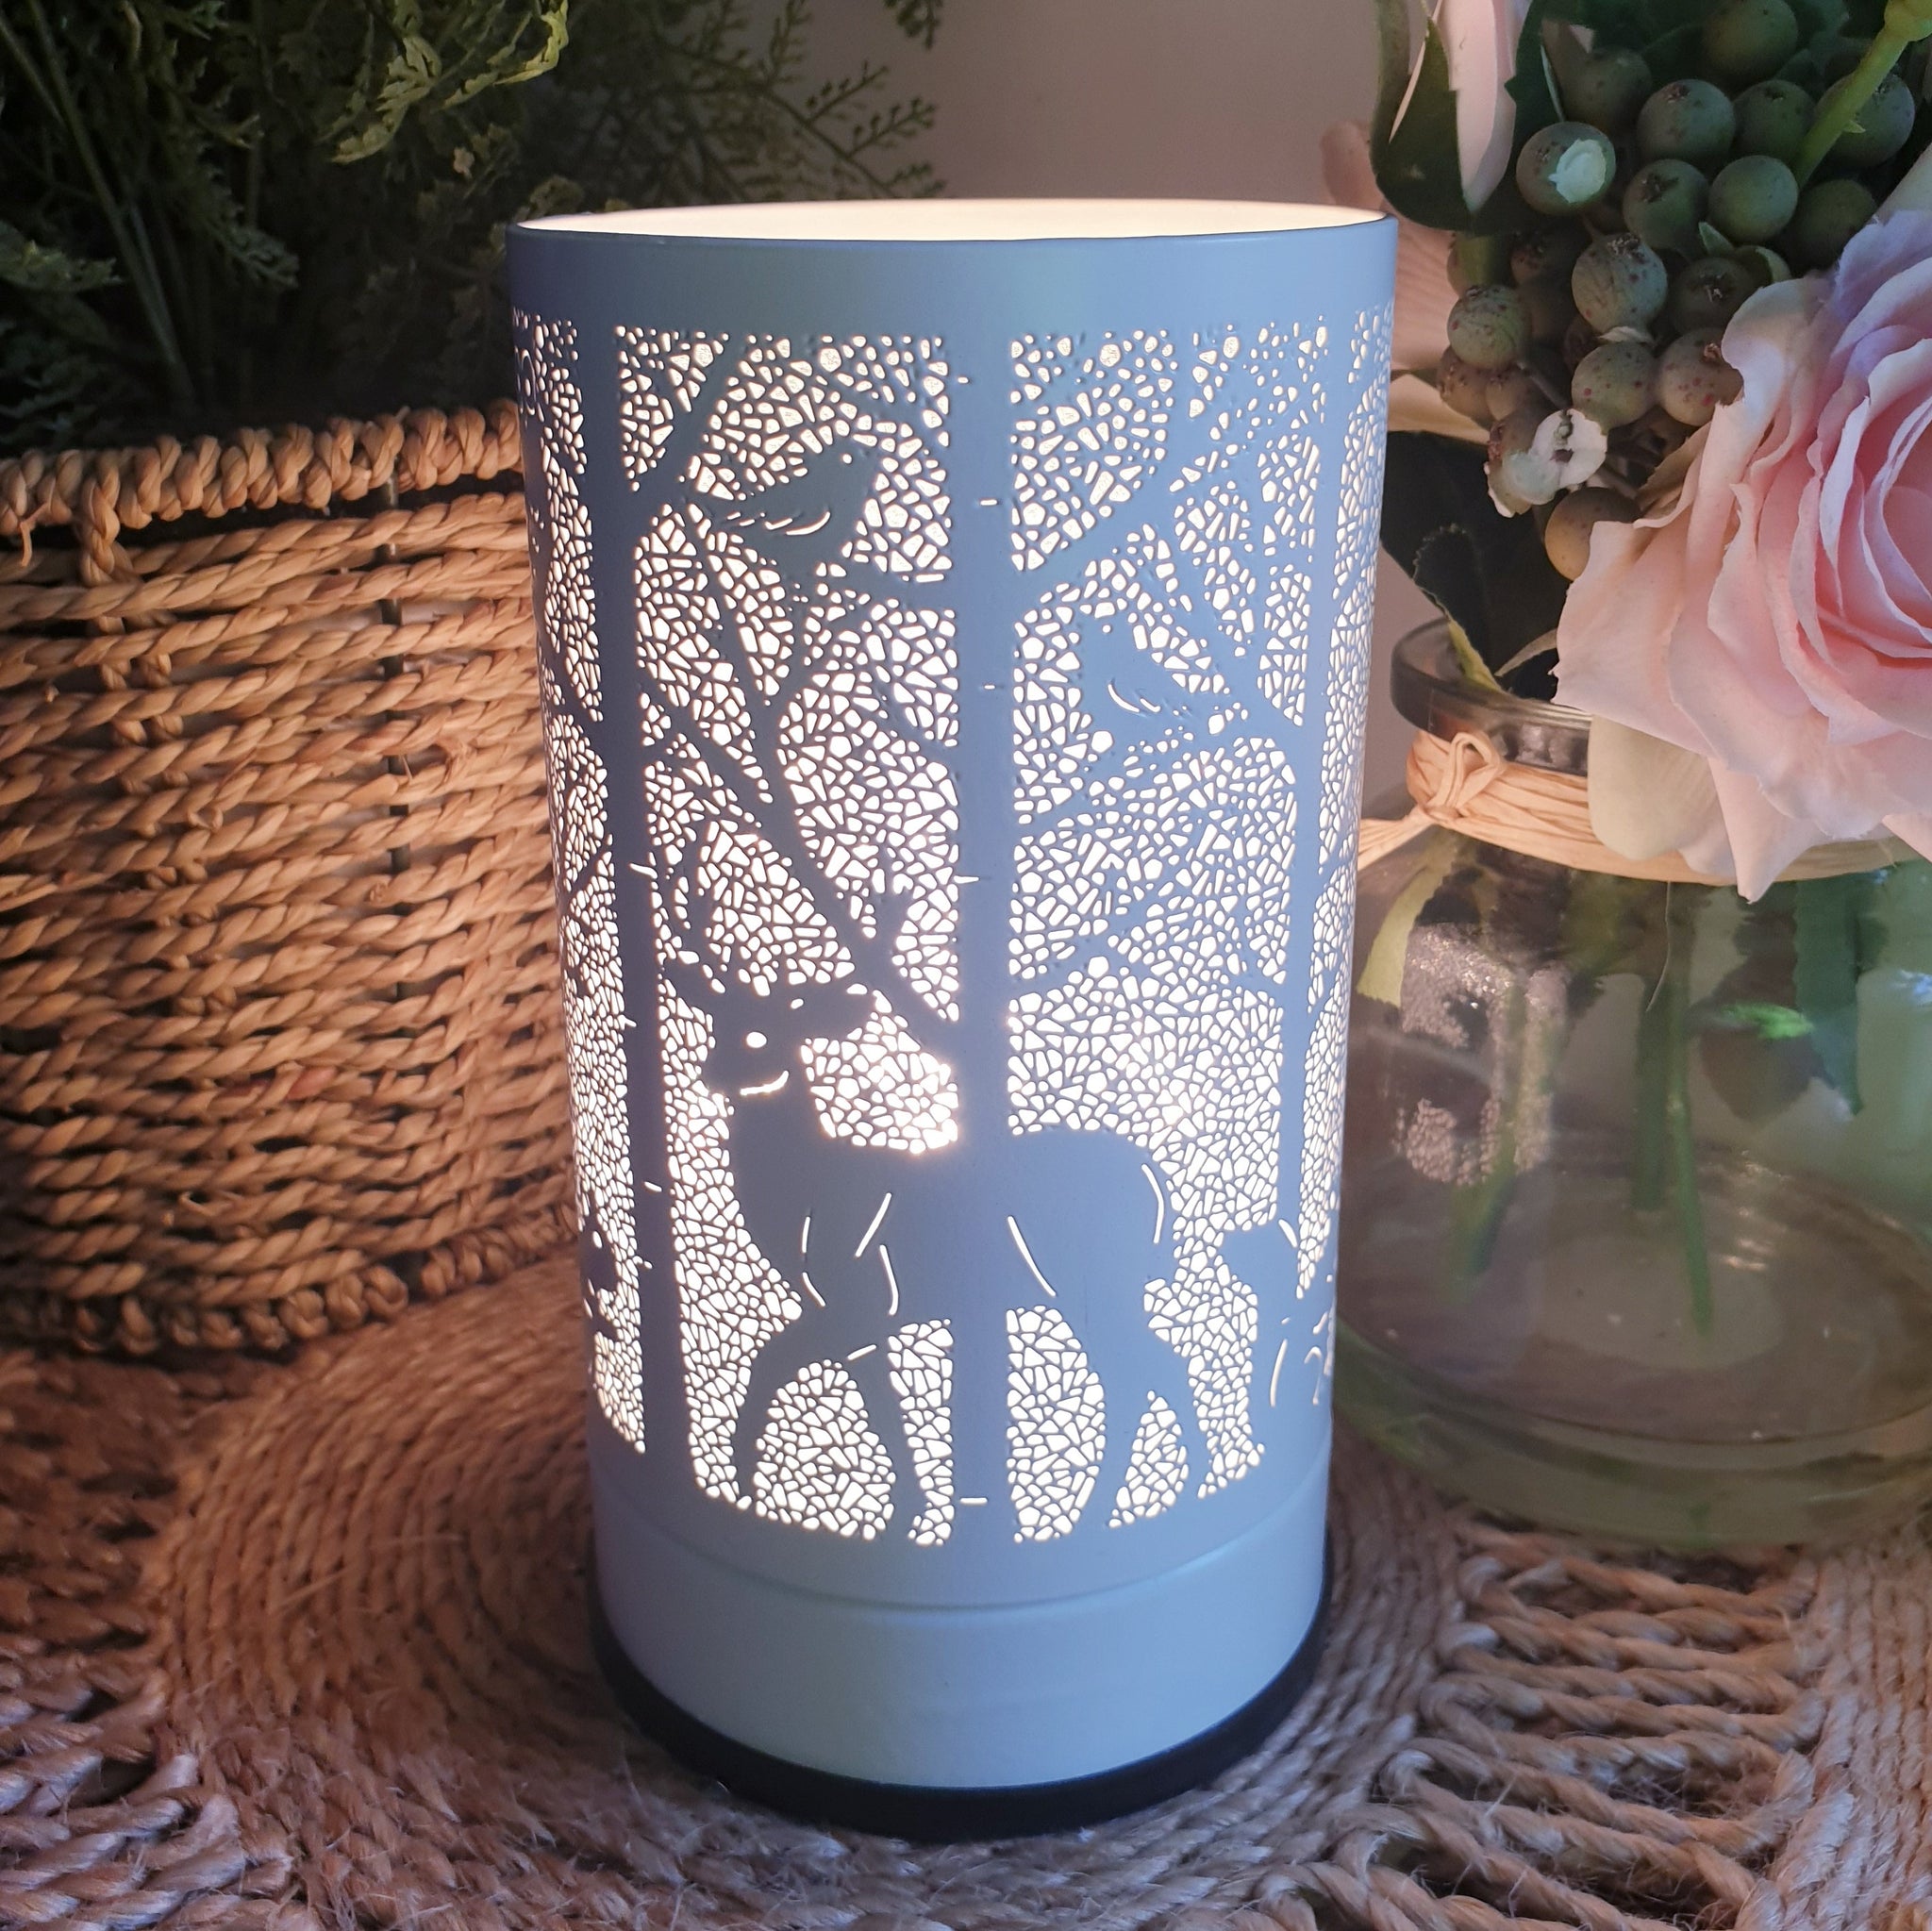 Woodland White Touch Electric Warmer